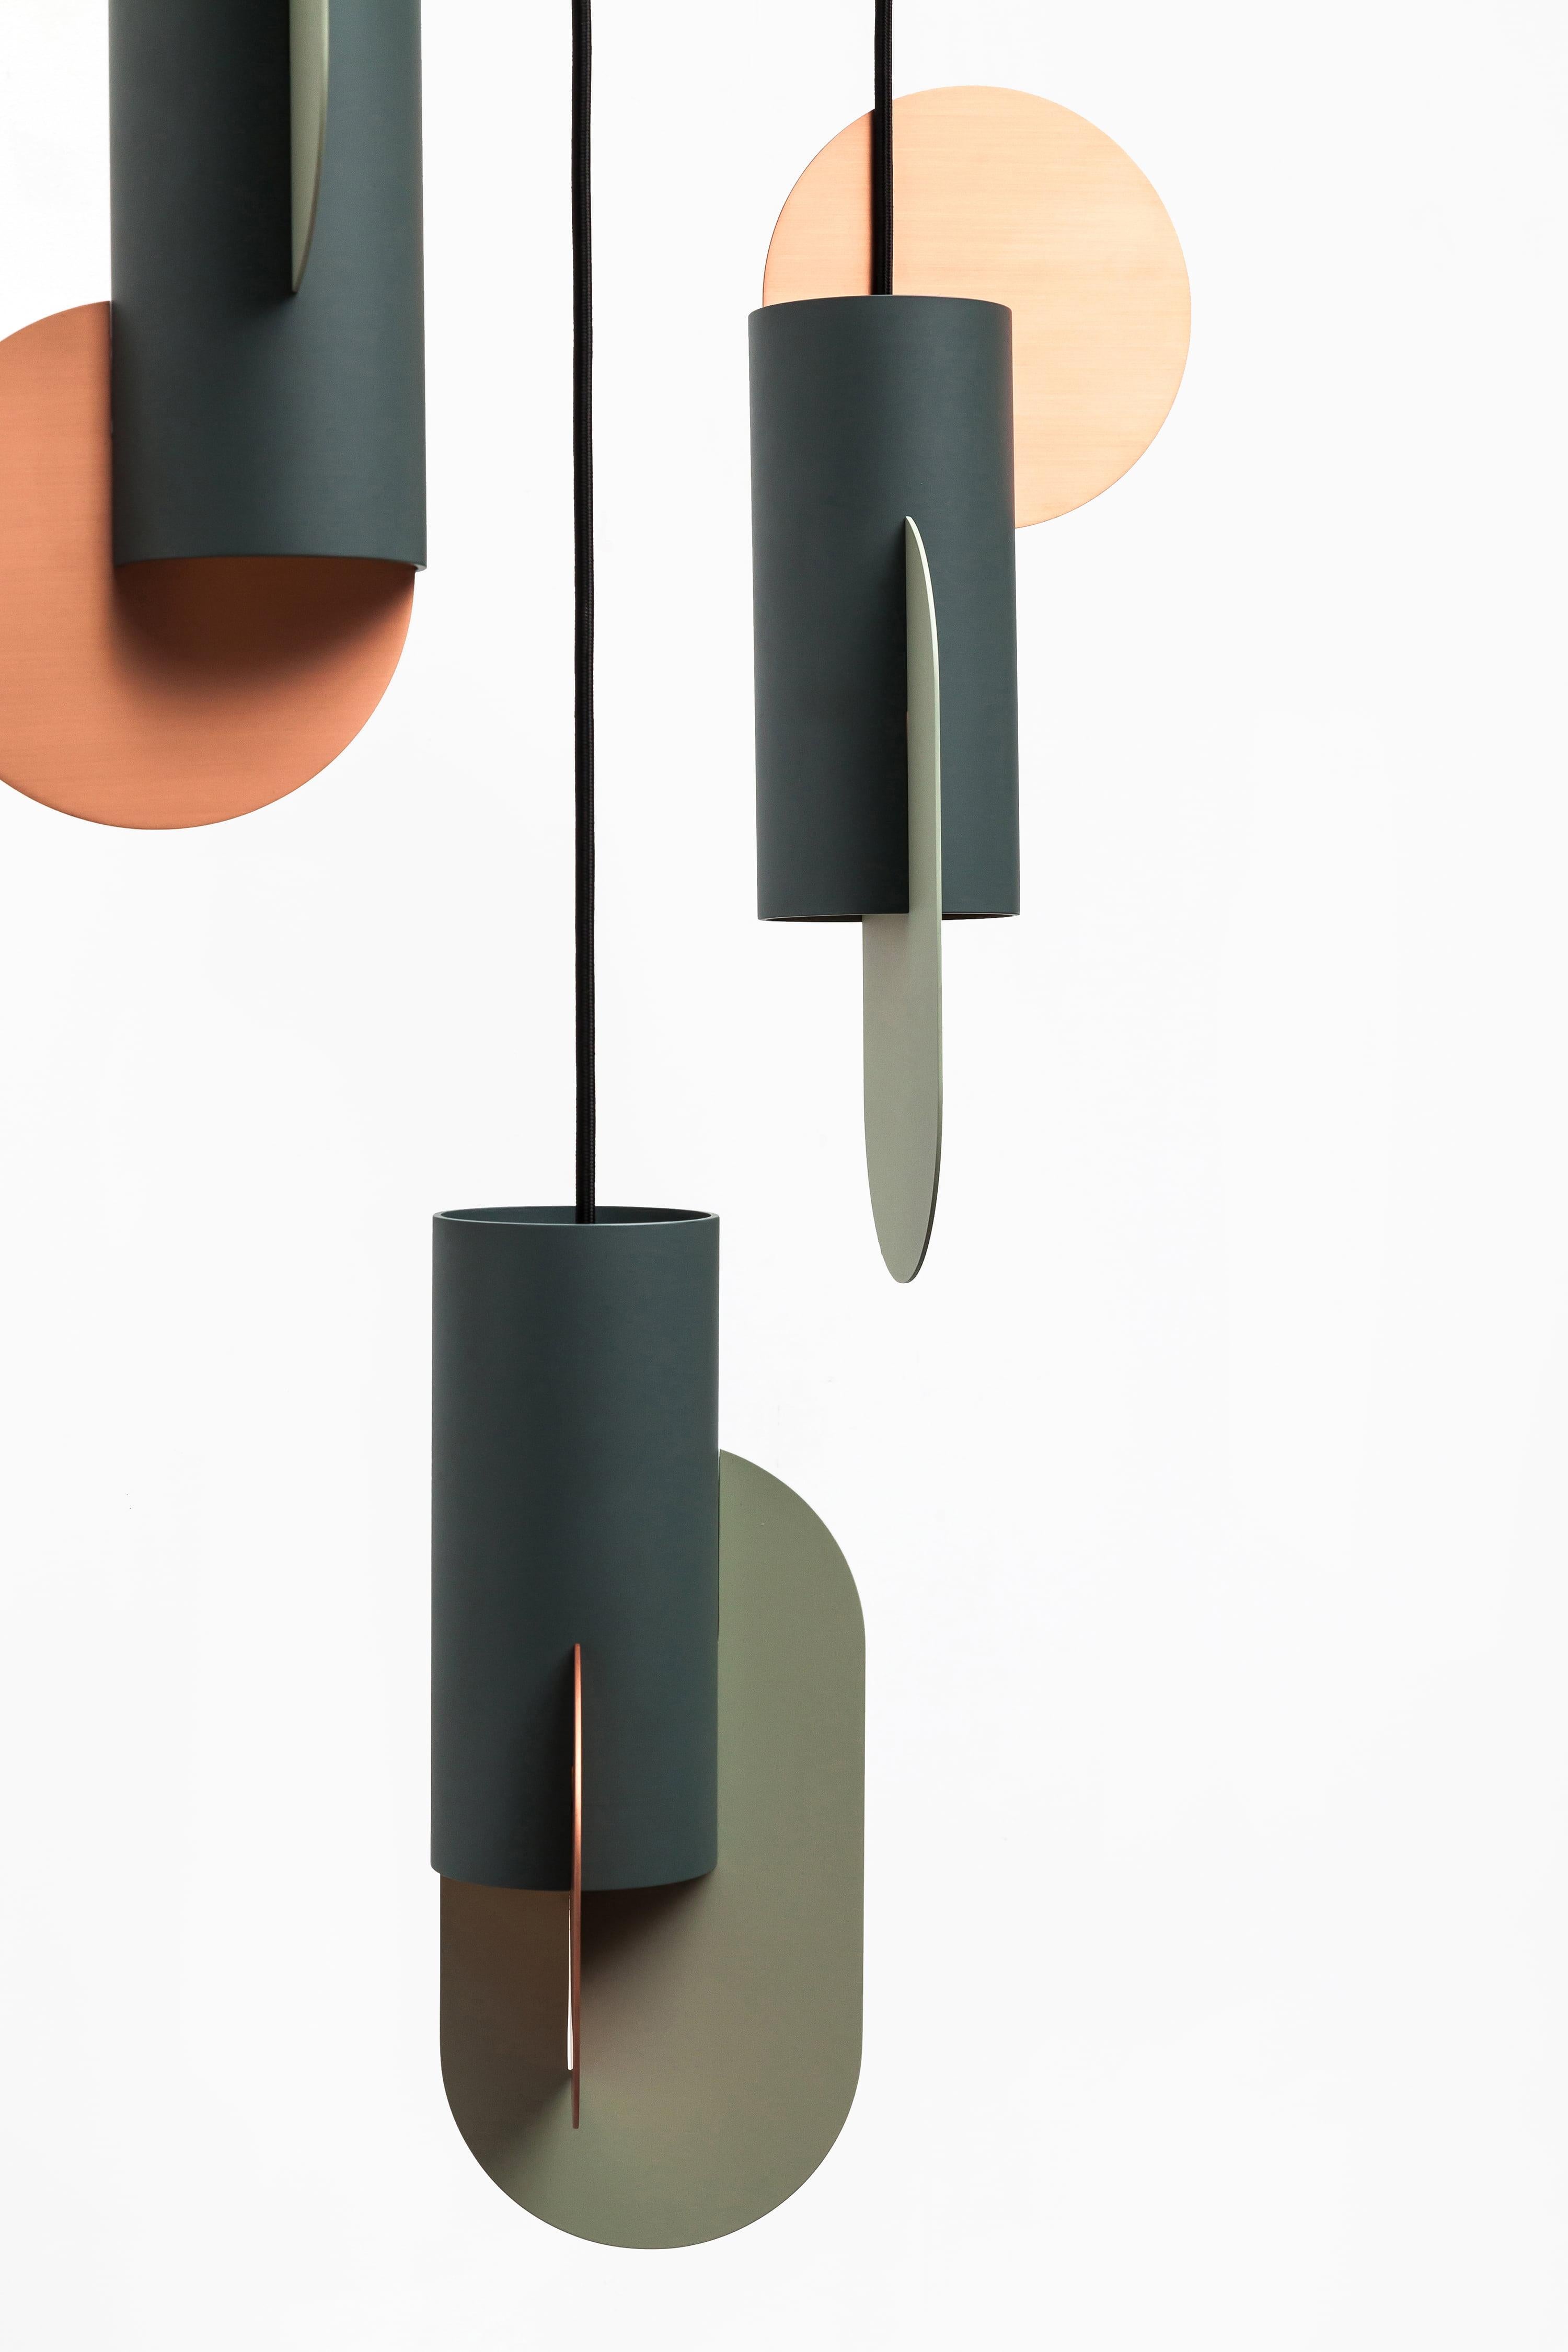 Painted Set of Three Contemporary Pendant Lamps Suprematic by NOOM in Copper and Steel